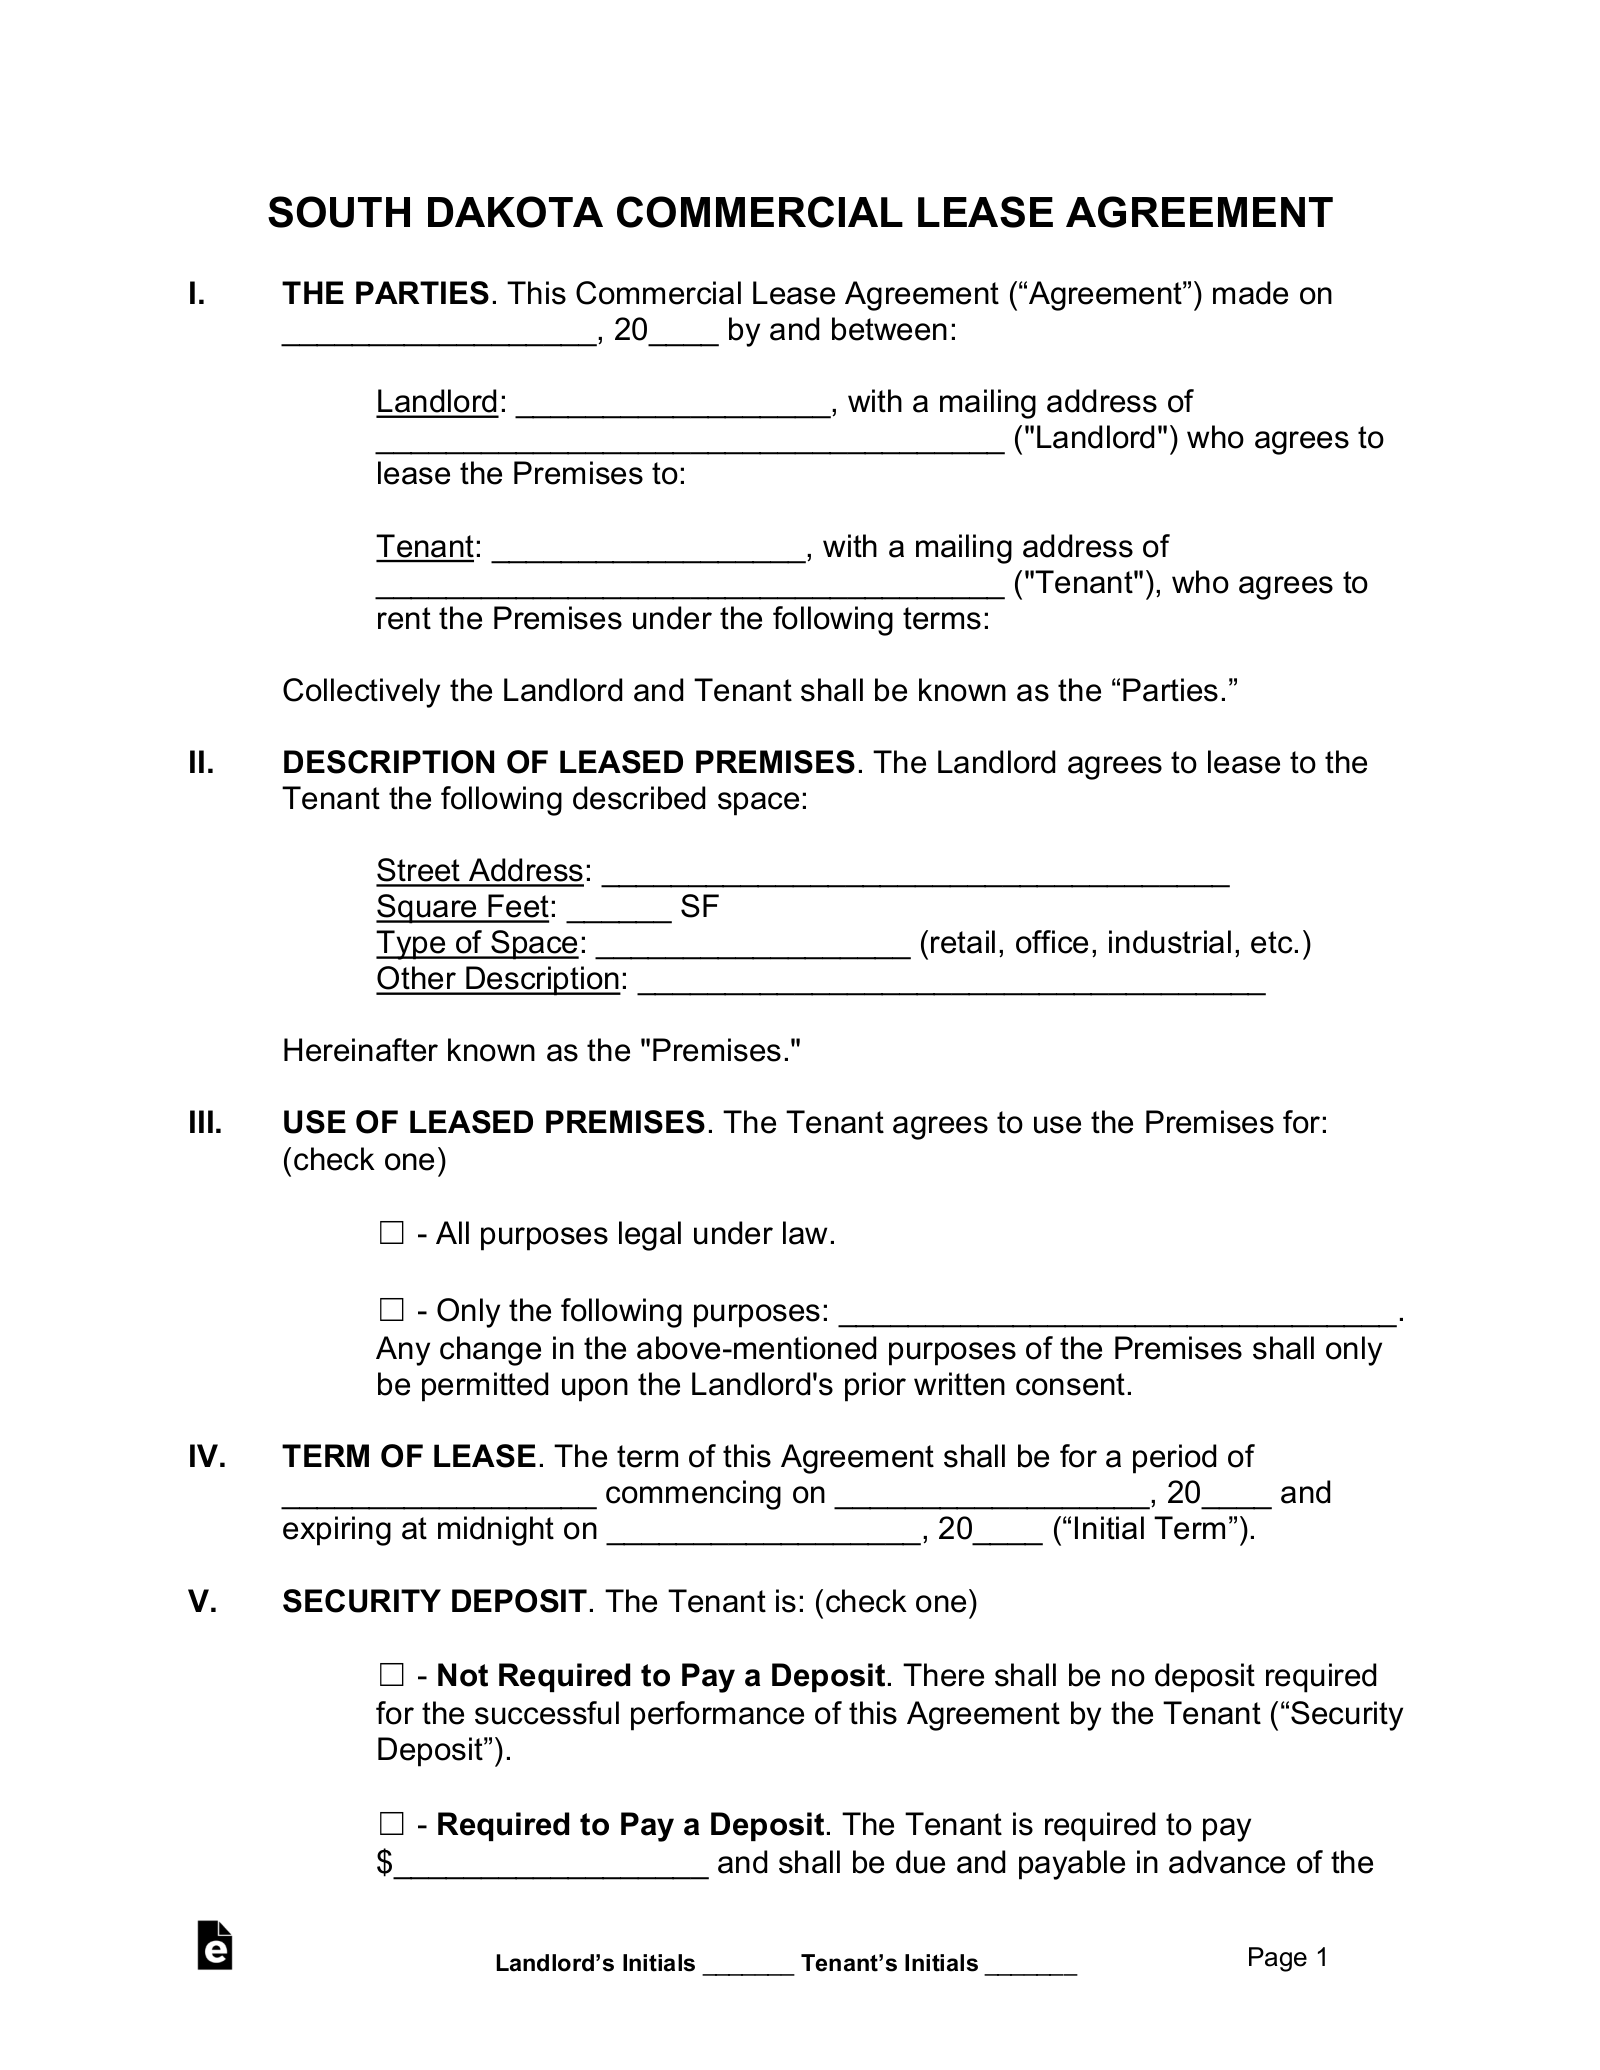 South Dakota Commercial Lease Agreement Template